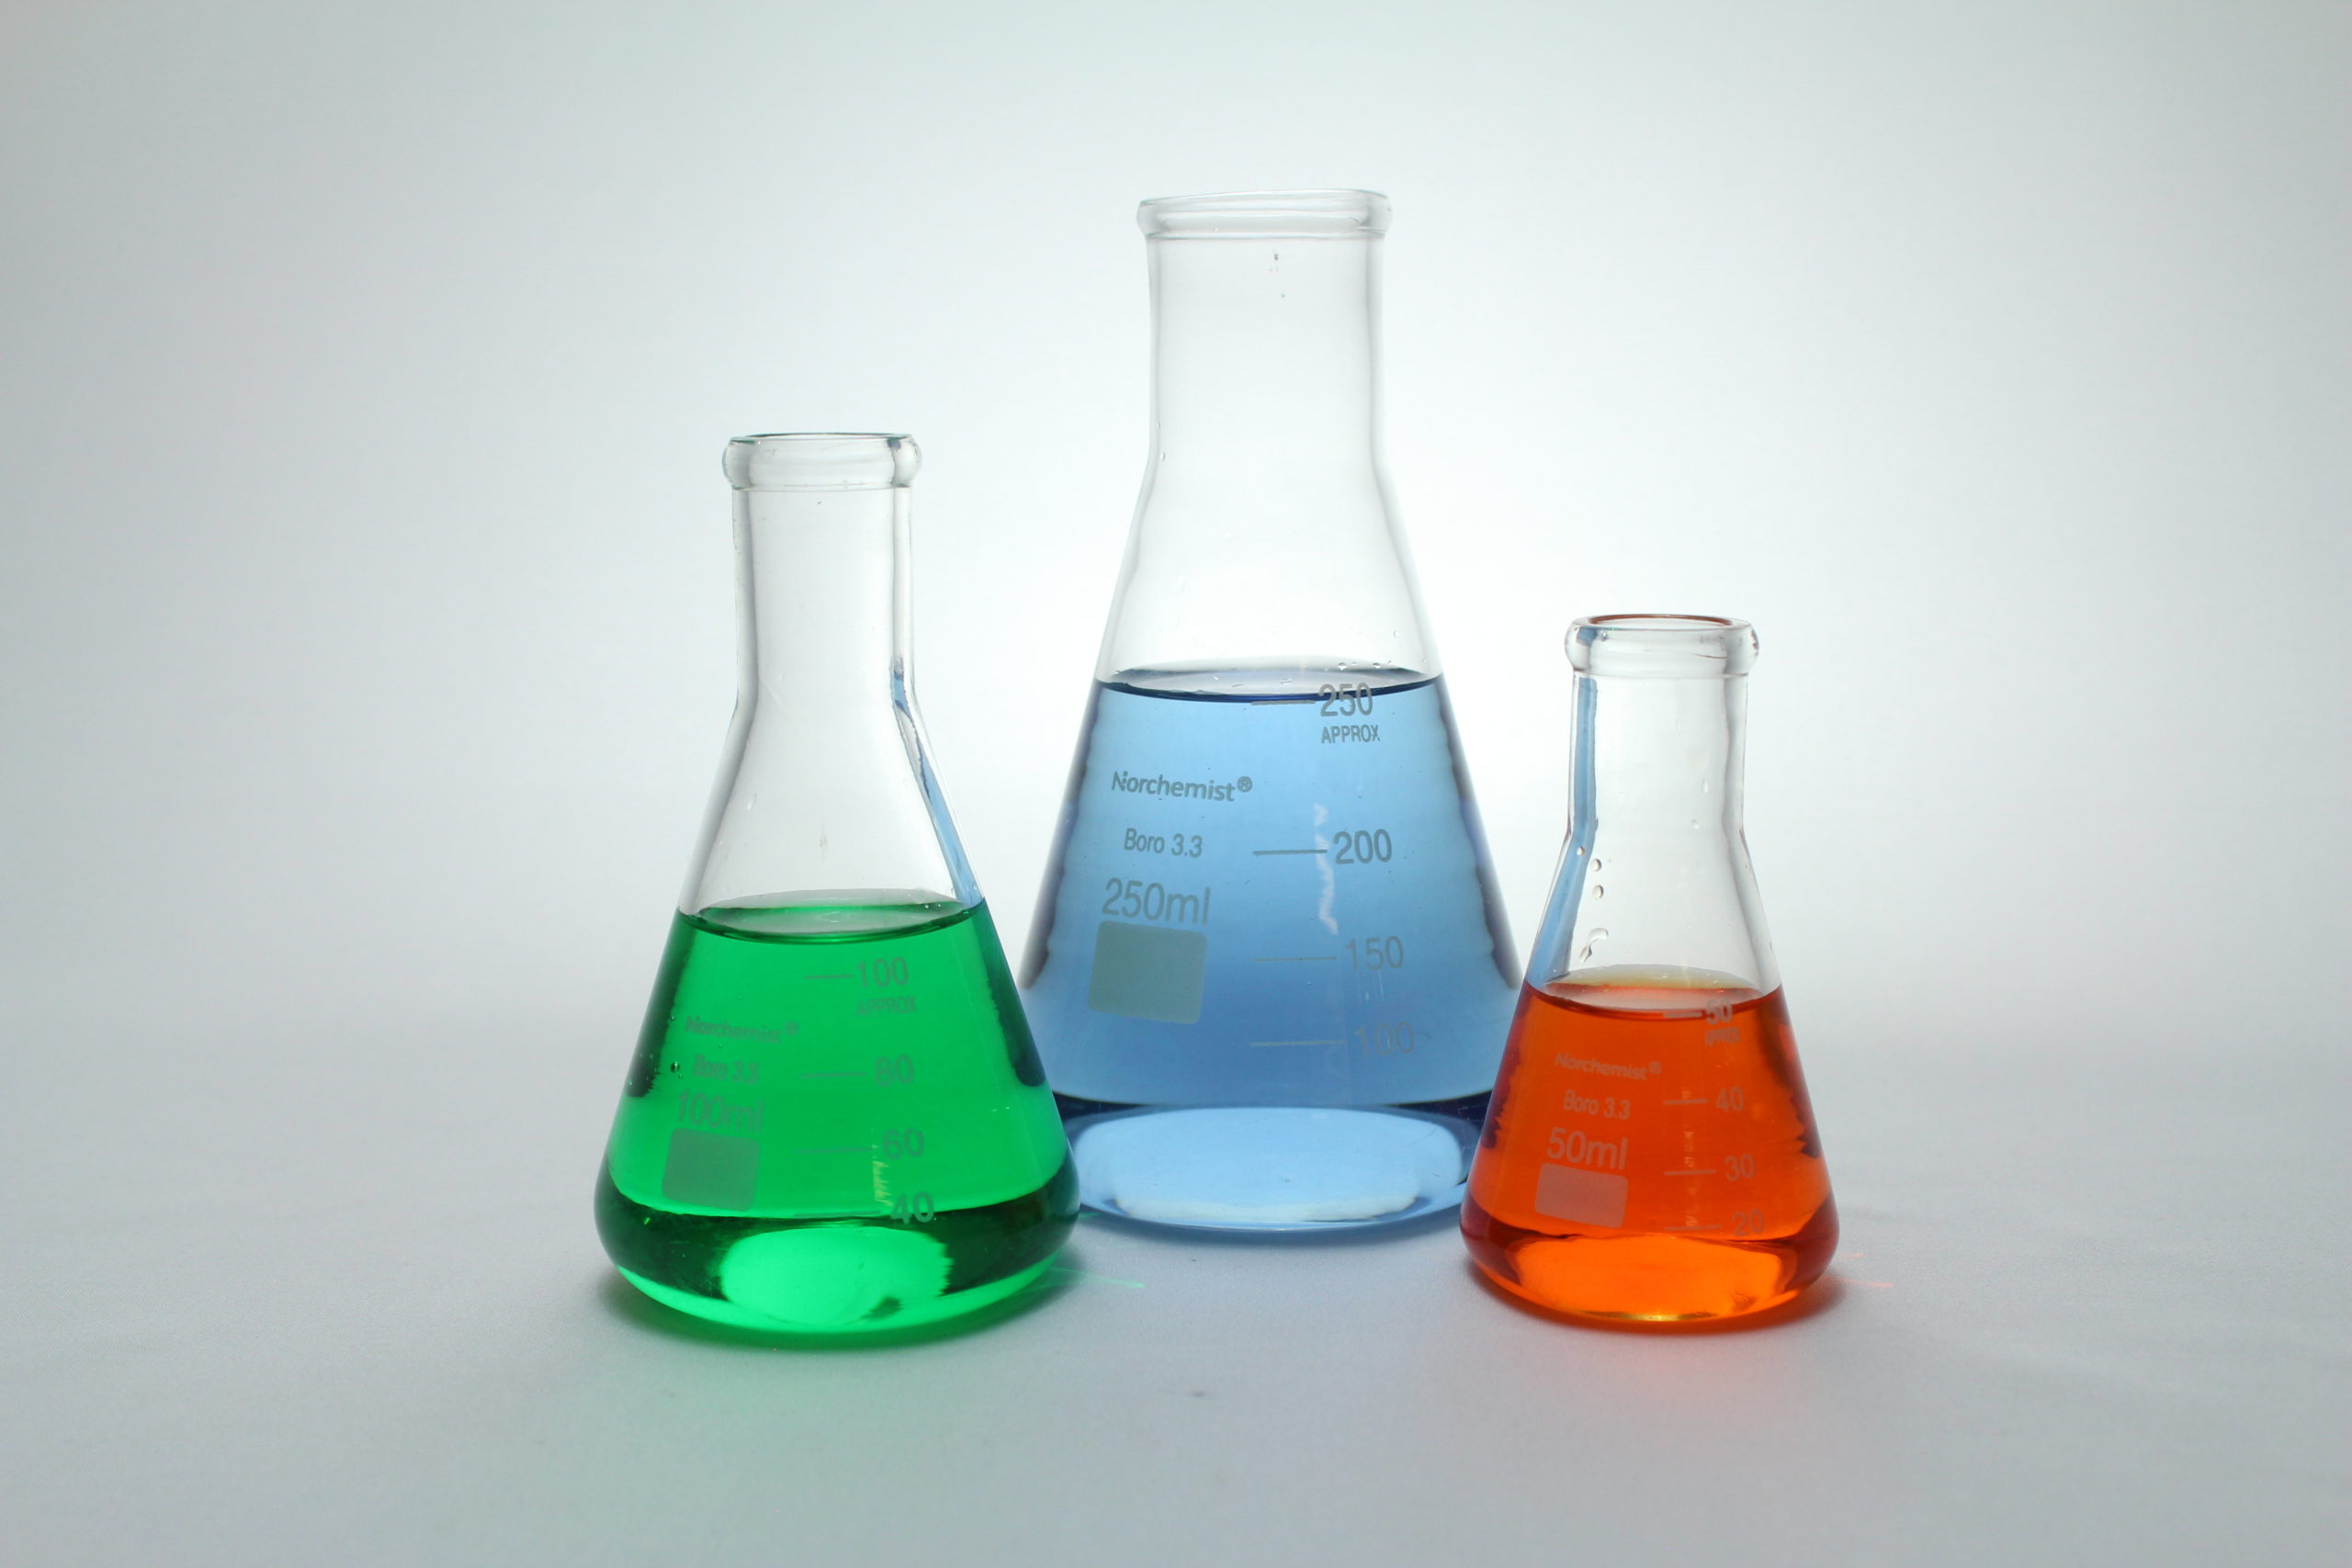 Which Type Of Glassware Is Most Likely To Be Used As A Reaction Vessel